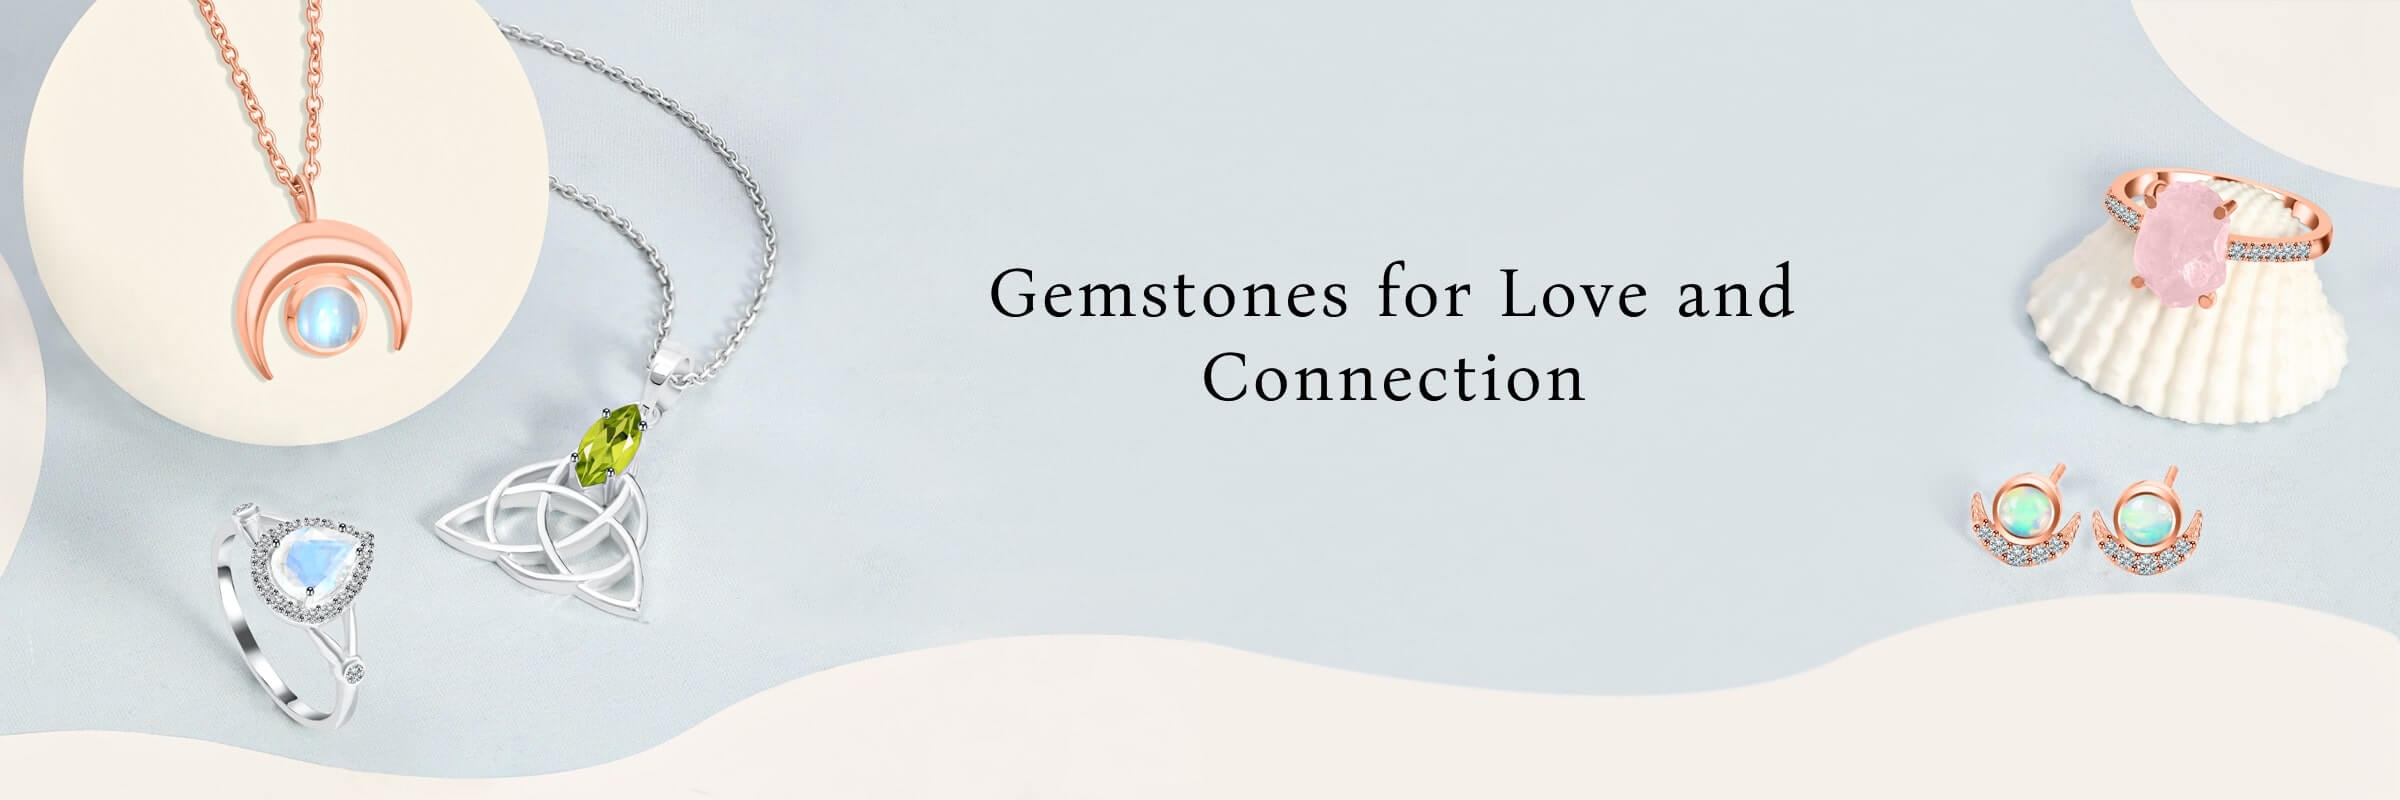 How To Use These Love Gemstones